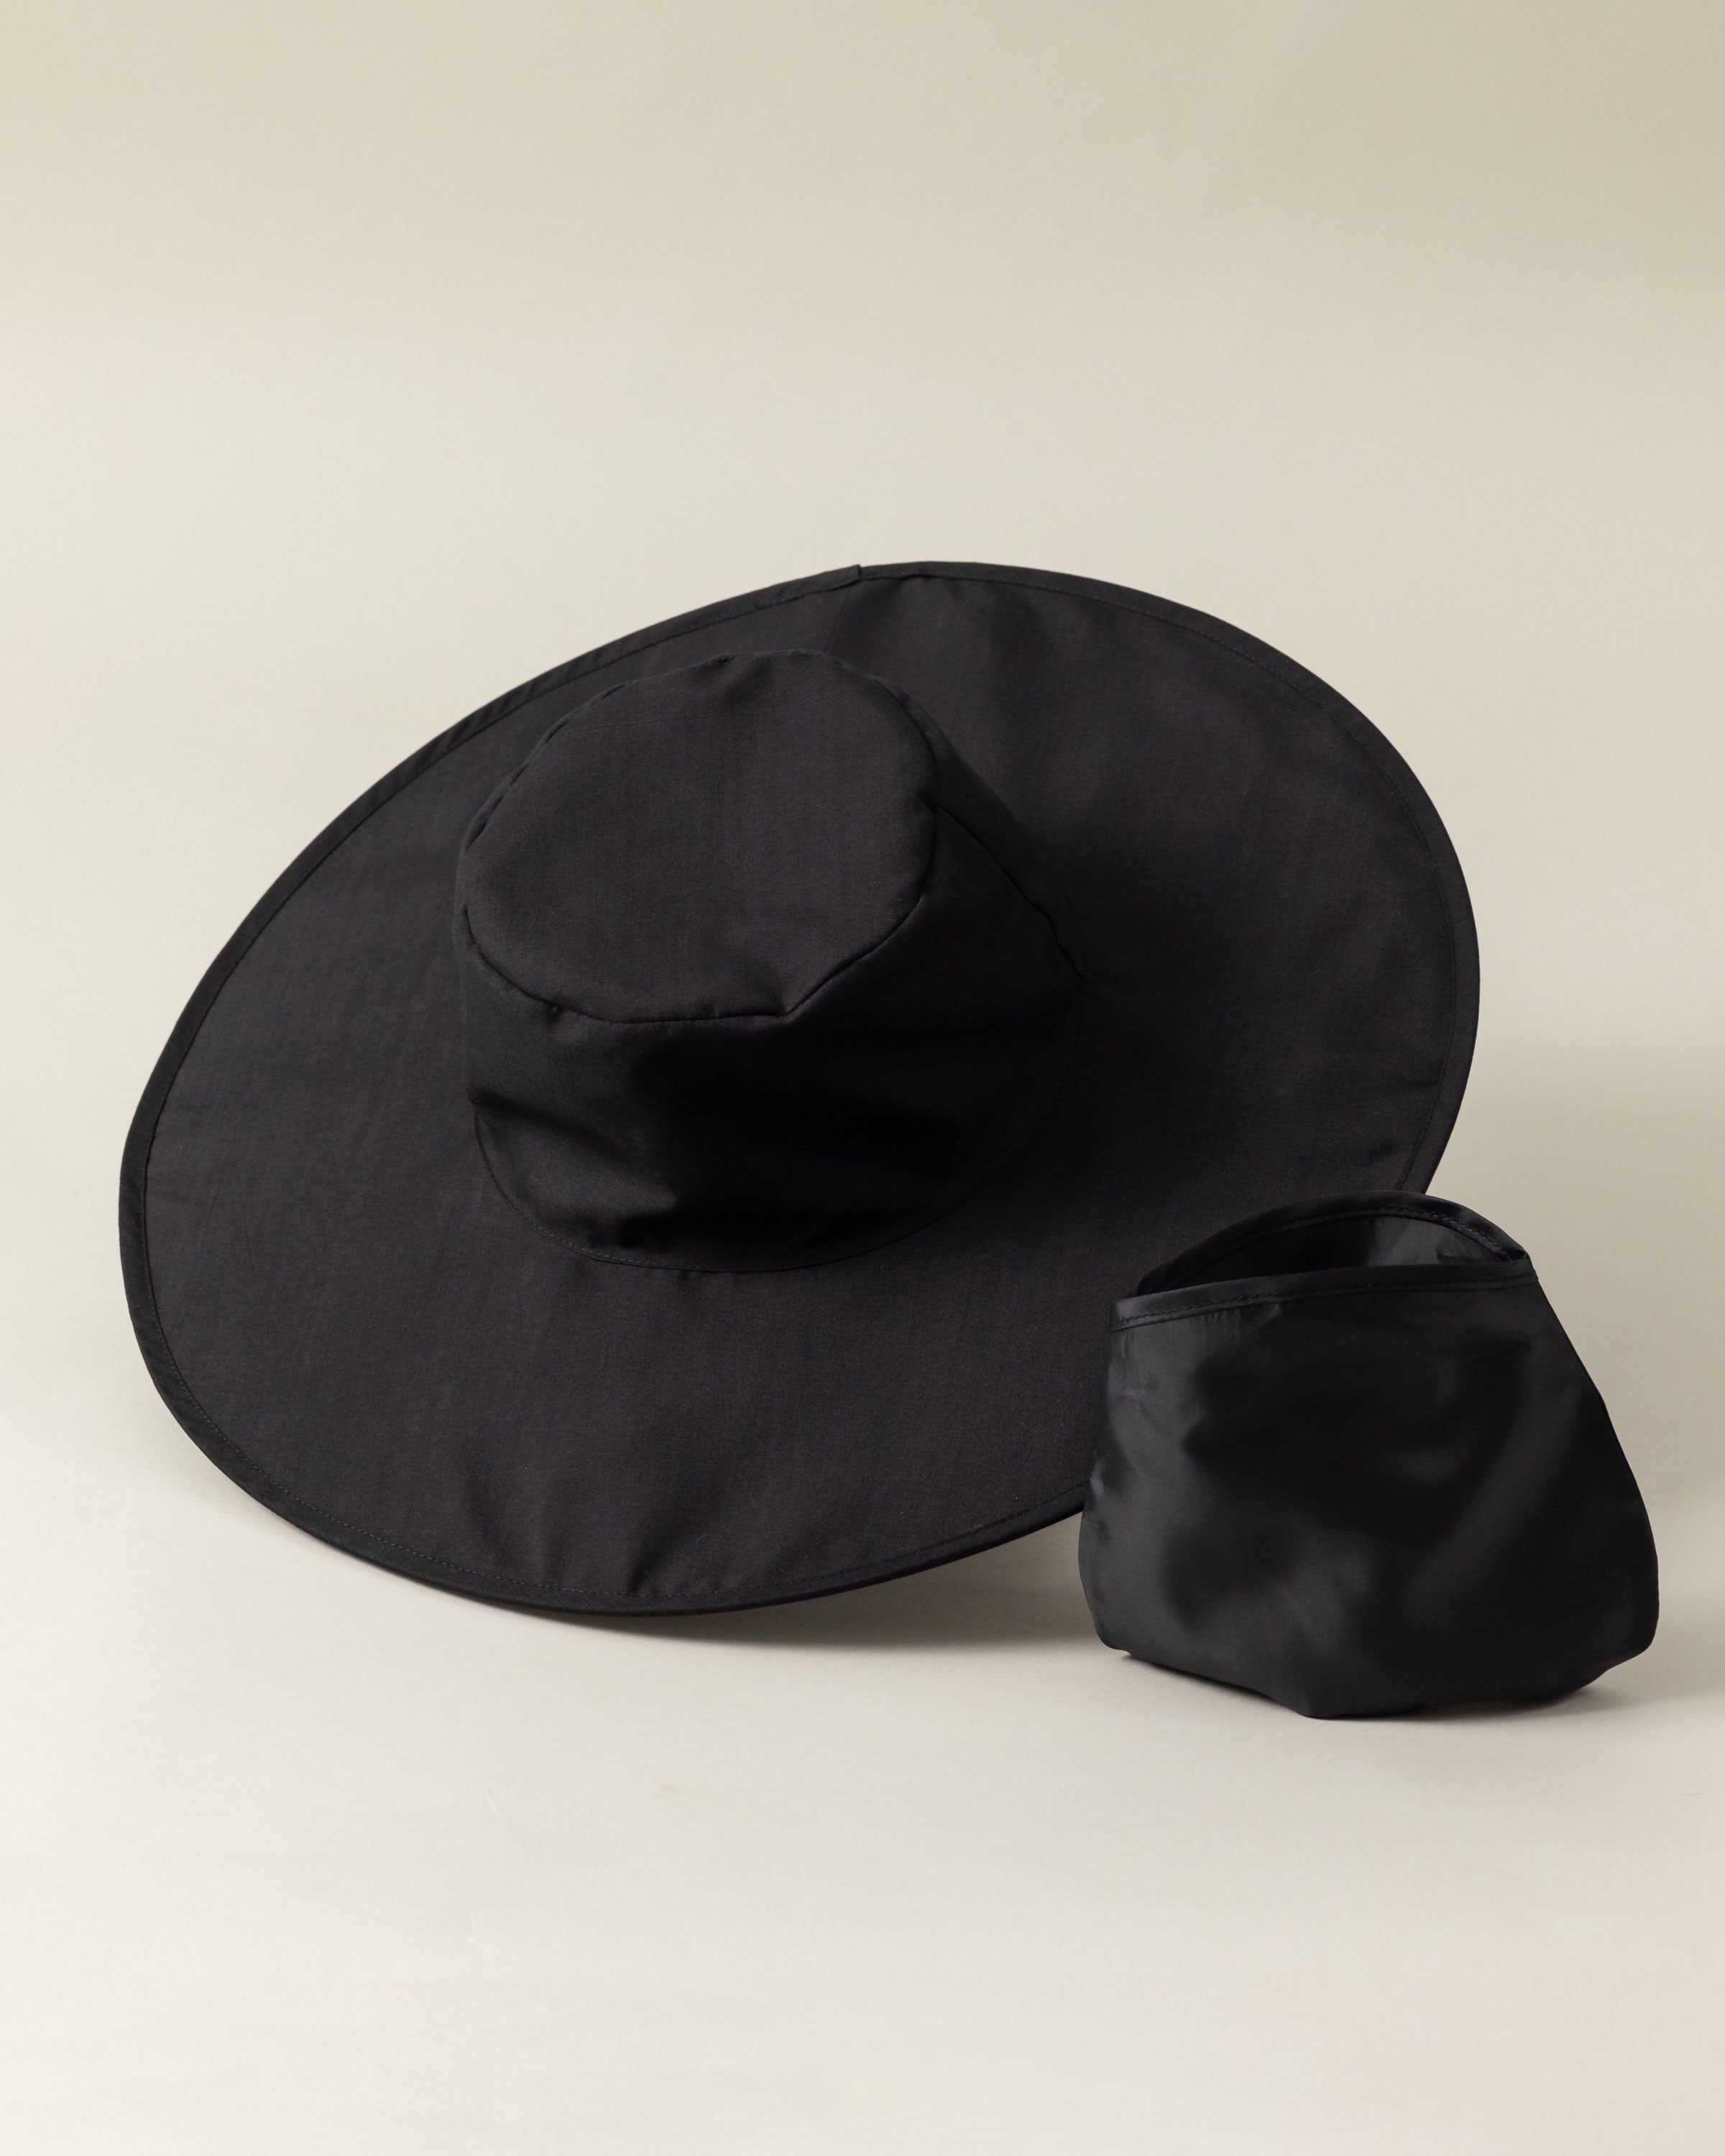 Satin Lined Foldable Sun Hat in Black